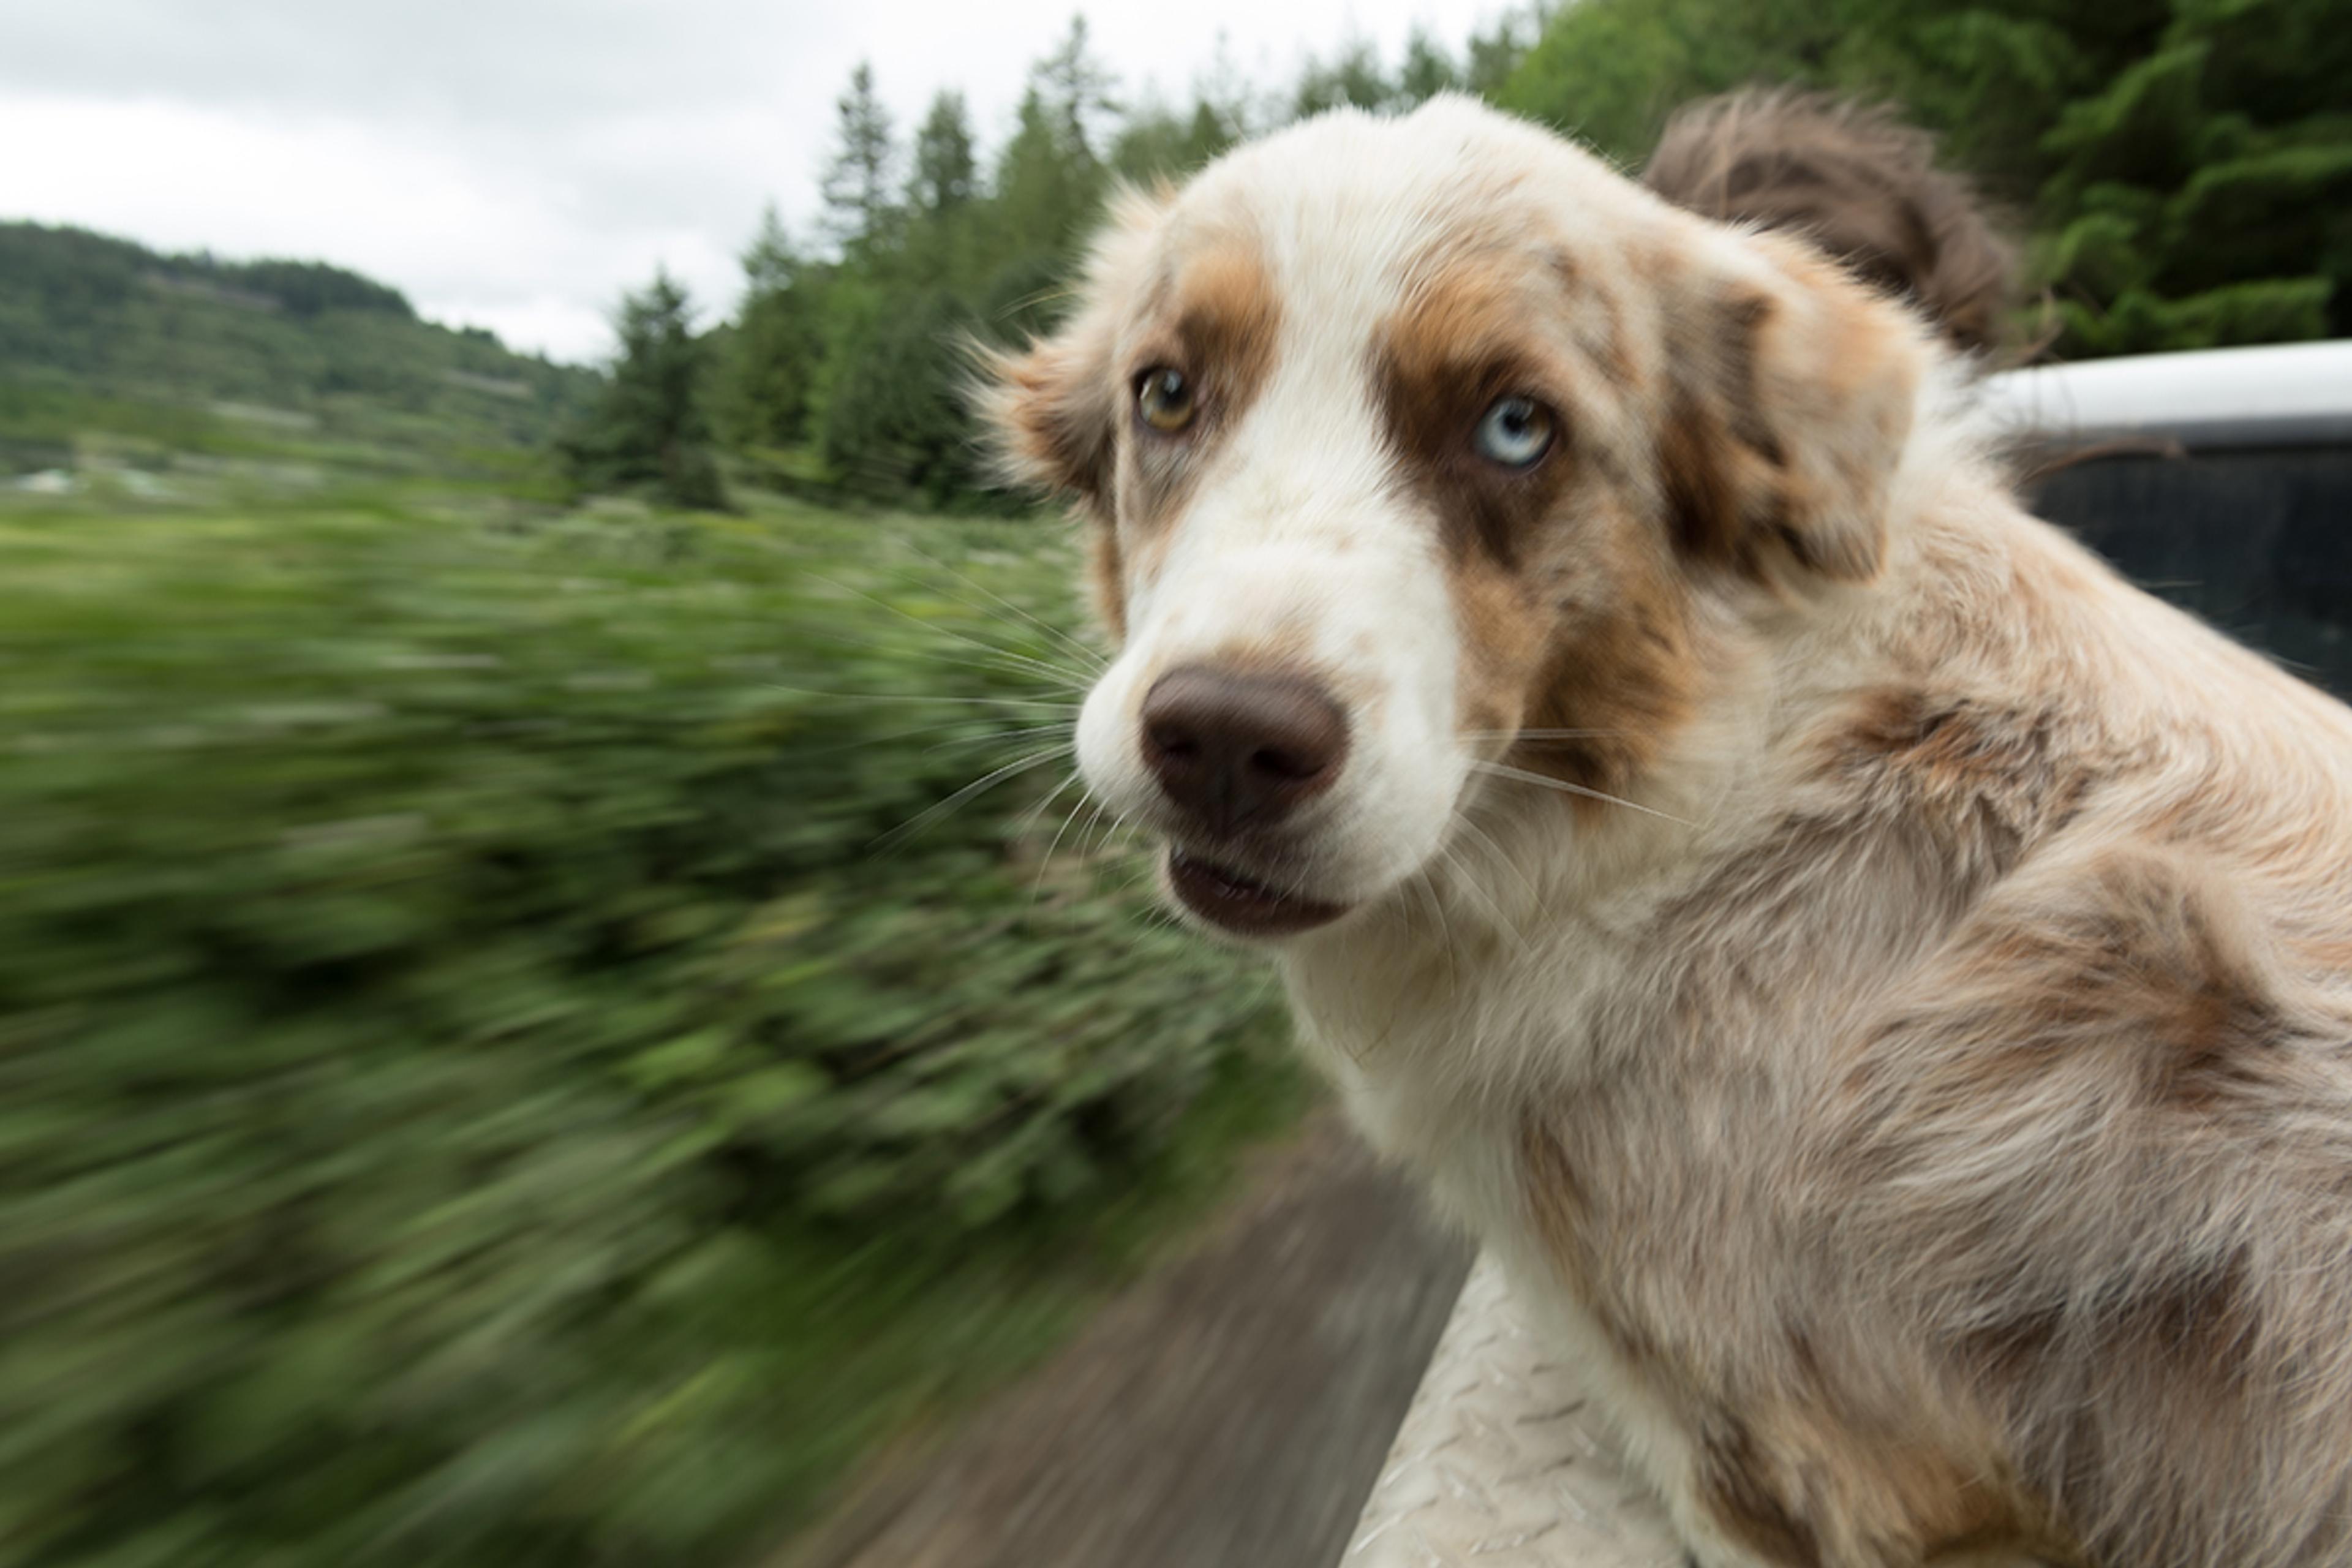 An artistic blurred picture of a dog riding in the back of a moving truck.